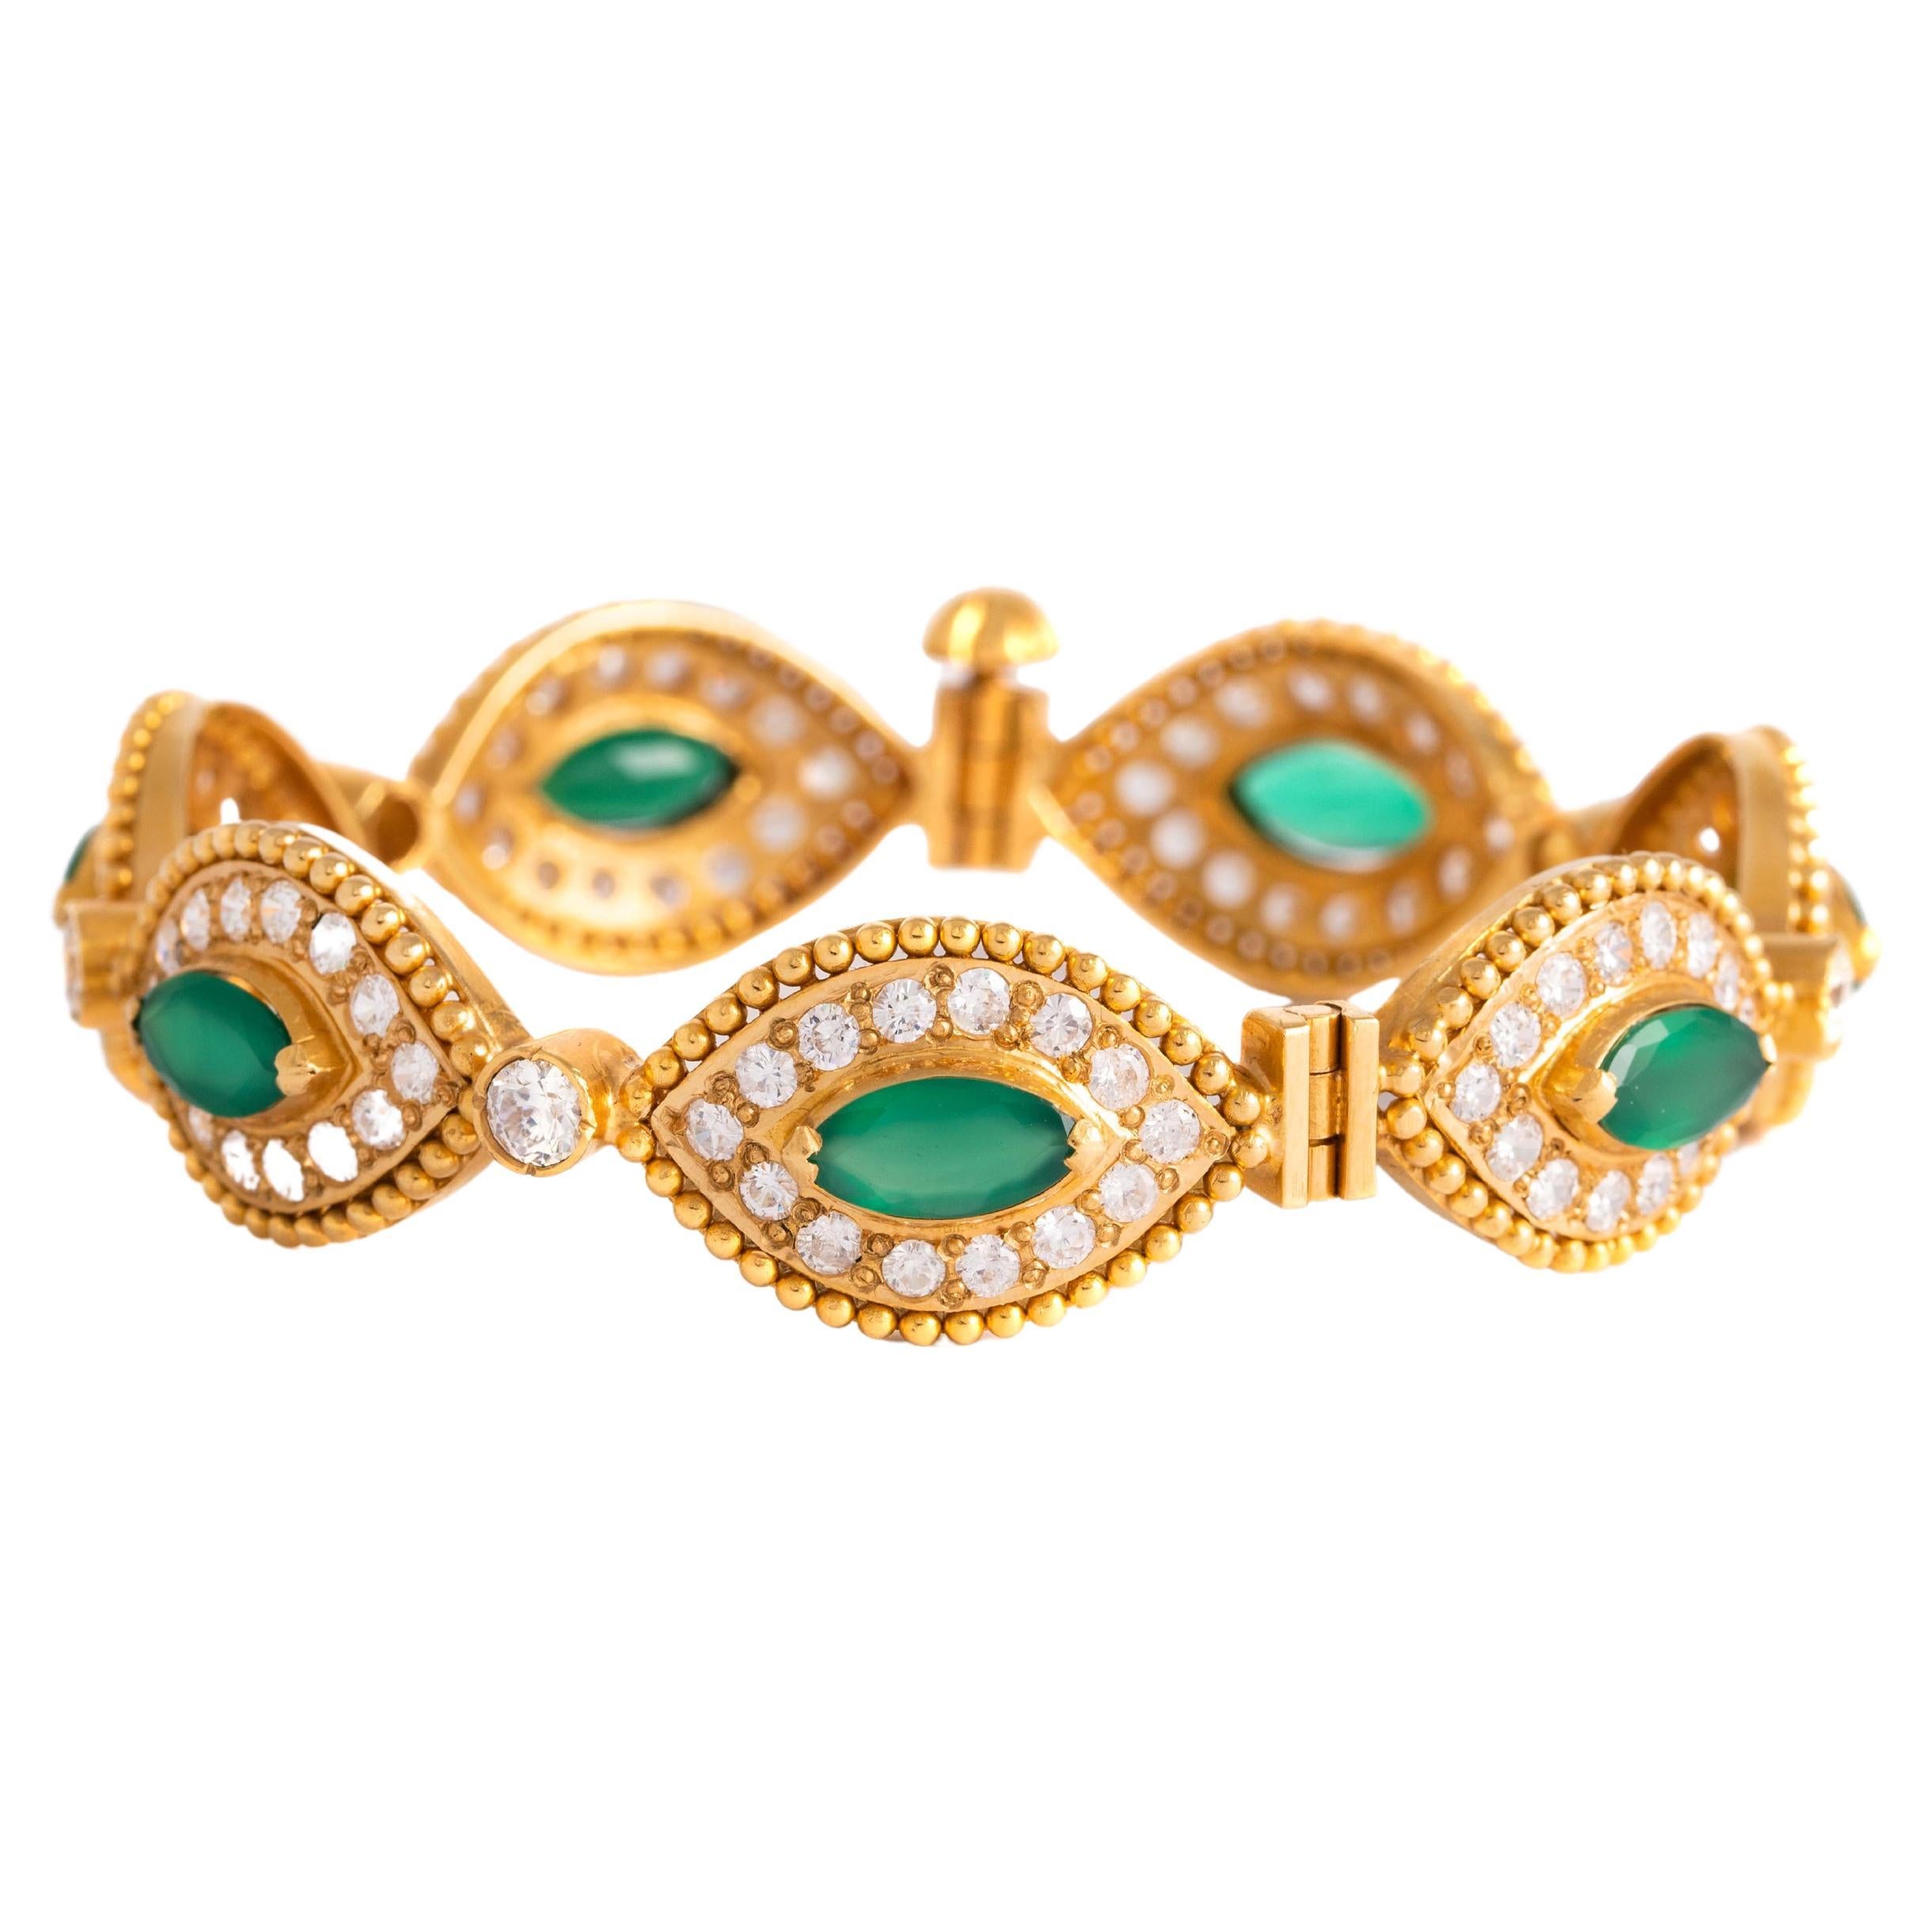 18K yellow gold bracelet set with marquise cut green stones and round cut white stones.
Circumference: 18.22 centimeters. 
Gross weight: 41.41 grams.